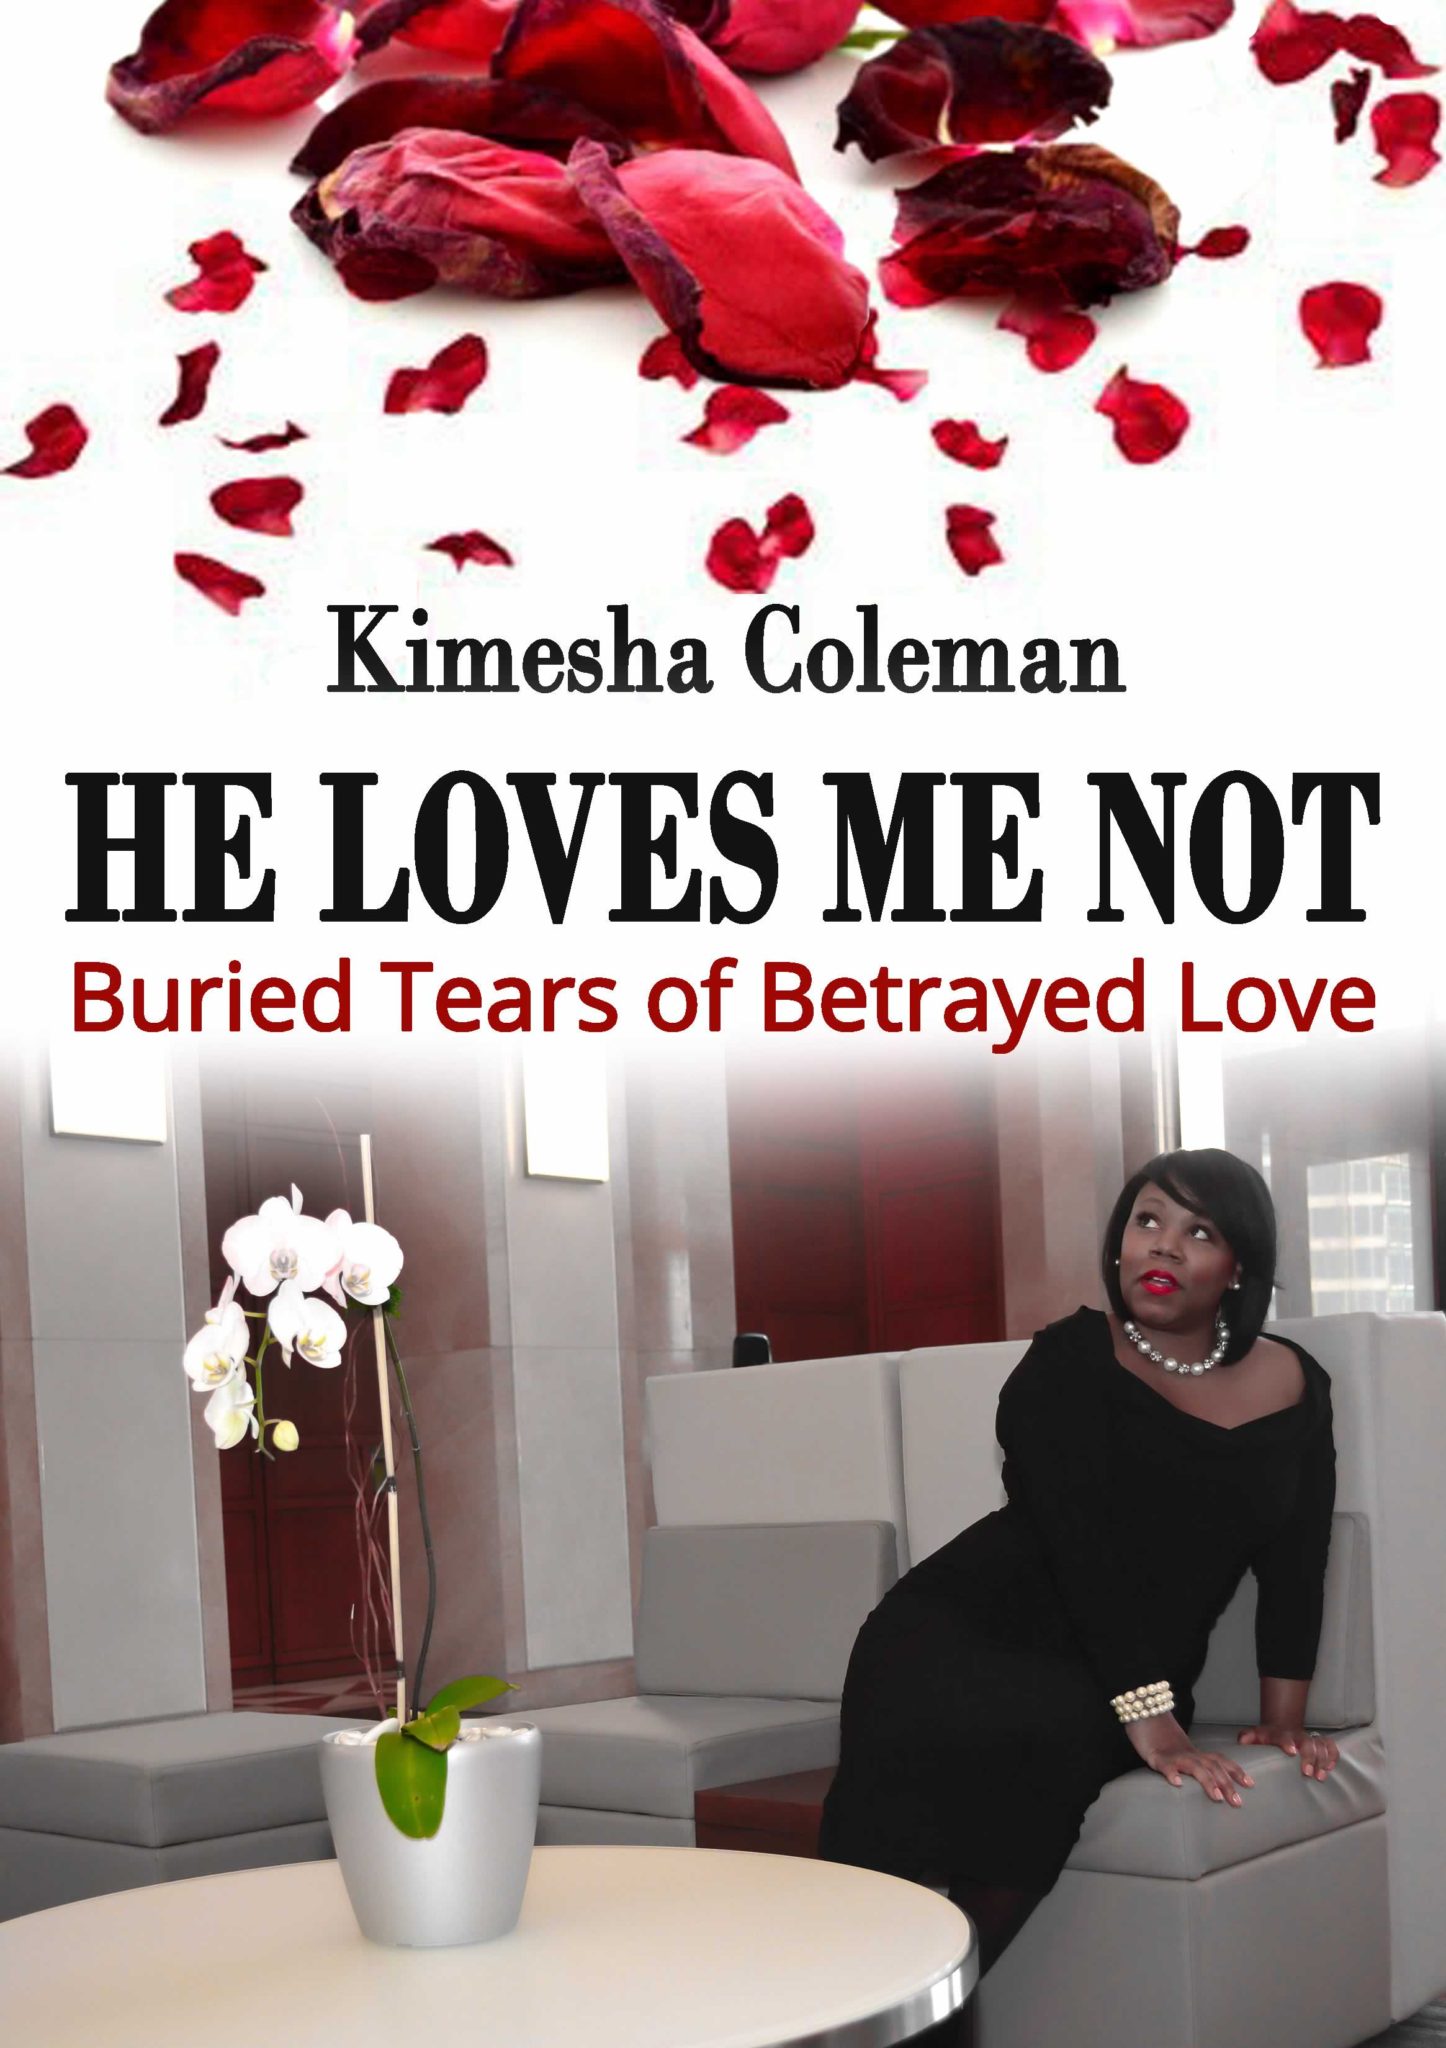 FREE: He Loves Me Not: Buried Tears of Betrayed Love by Kimesha Coleman